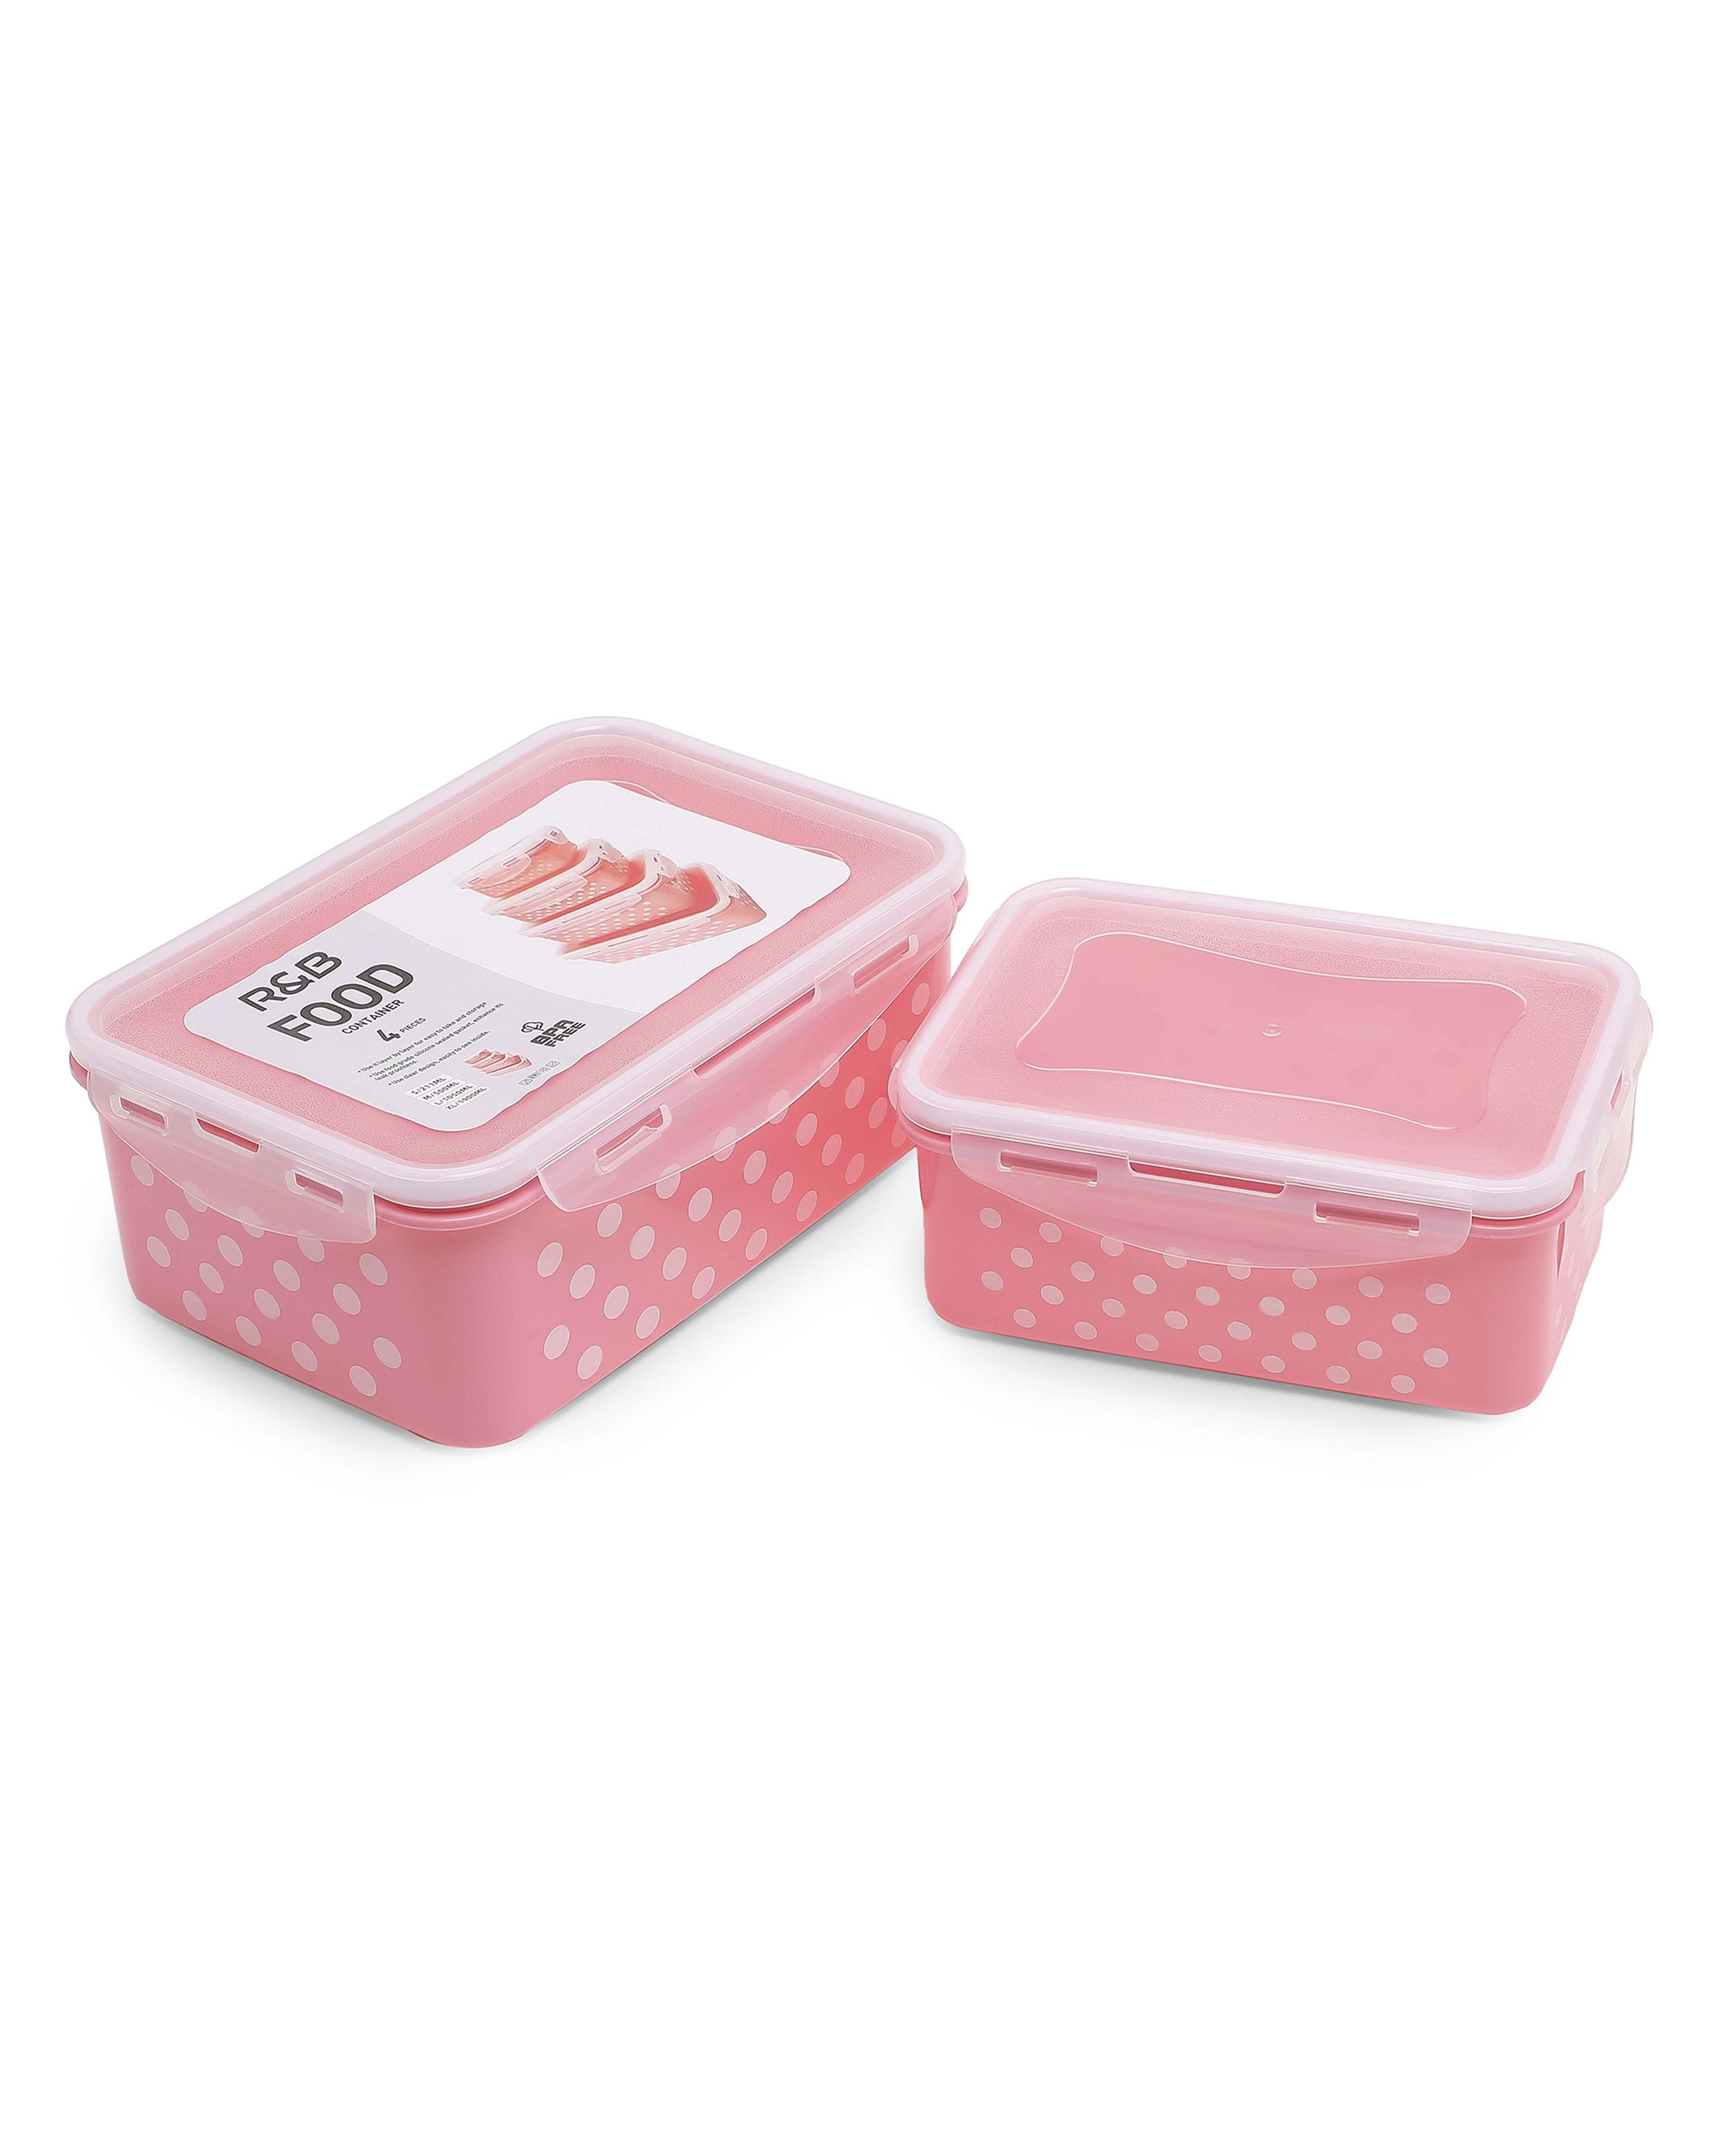 Pack of 4 Storage Containers